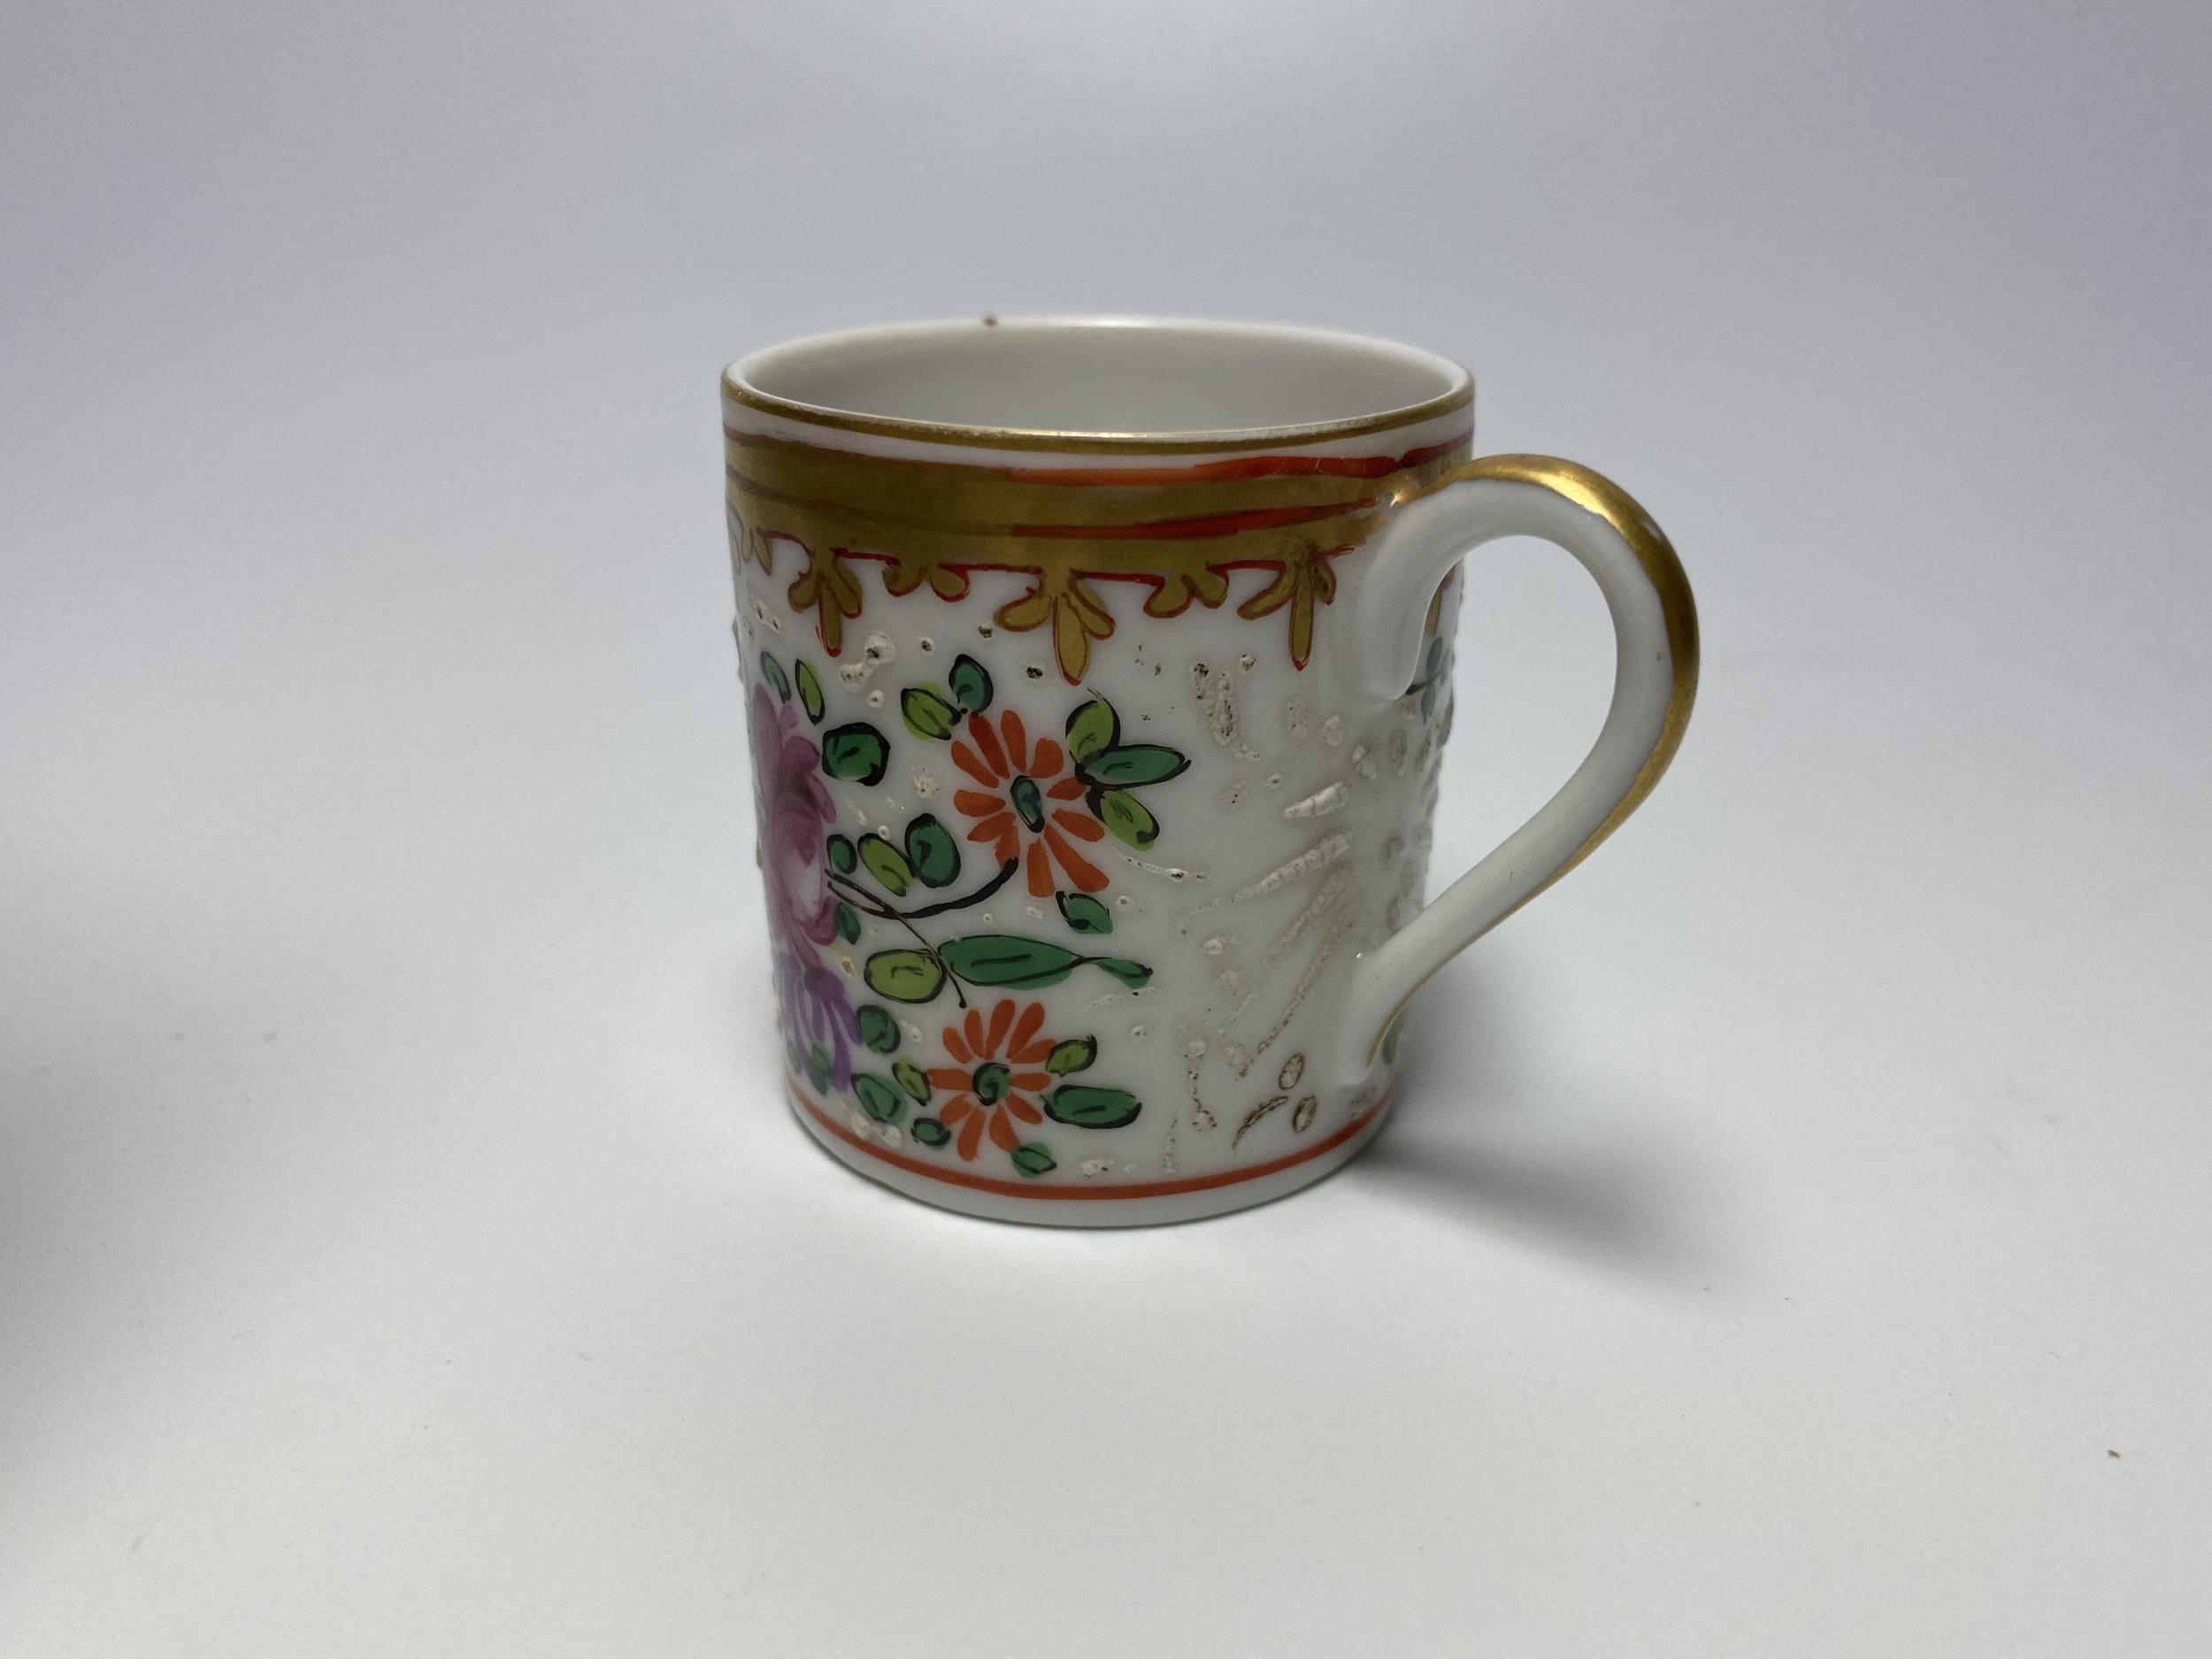 A MINIATURE 19TH CENTURY CHINESE EXPORT PORCELAIN TANKARD, HEIGHT 4CM - Image 3 of 5